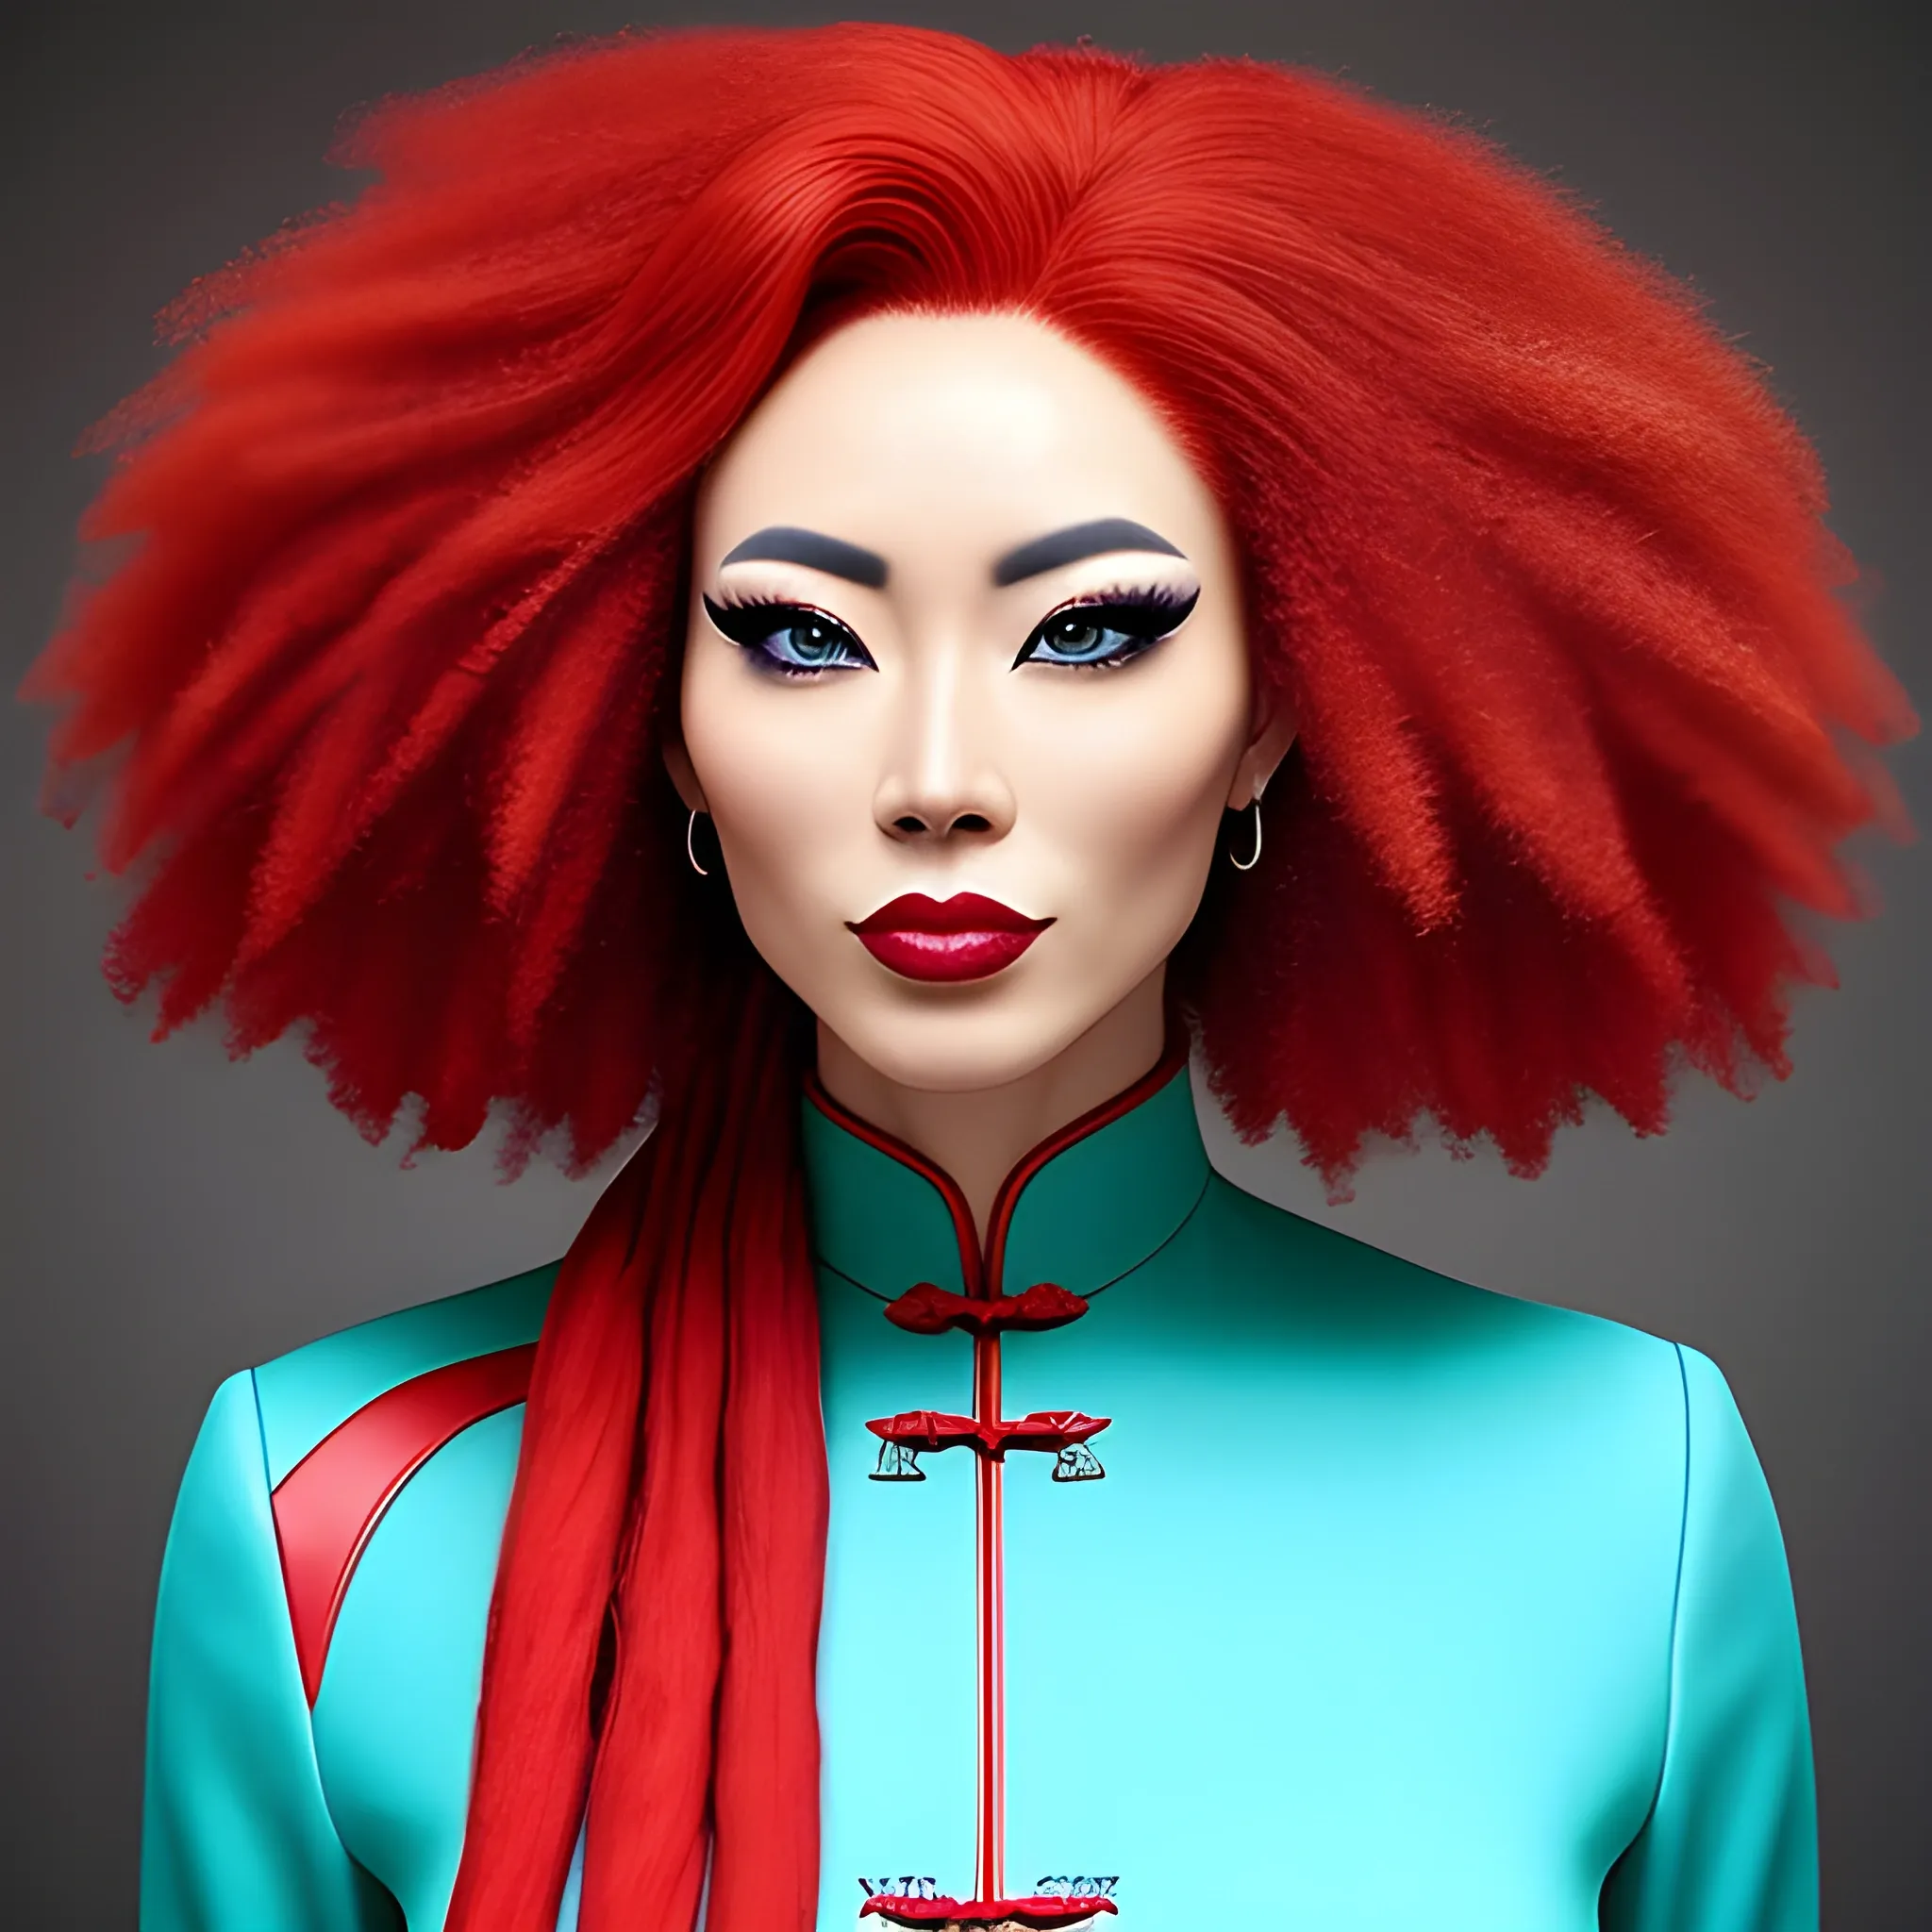 n this photograph, we aim to capture a super realistic image of a Chinese girl with blue eyes and red afro hair, combining unique and striking elements. The intention is to create an image that appears authentic, even though it may feature unusual characteristics.

Characteristics of the Girl:

A Chinese girl's face with typical ethnic features, such as almond-shaped eyes and soft cheekbones.
Expressive and realistic blue eyes, vivid and intense, contrasting with the skin tone and hair color.
Afro hair in a vibrant red shade, with natural and defined curls. The color should look vivid and authentic.
The facial expression should convey a mix of curiosity and wonder, highlighting the beauty of this unique combination of features.
Attire and Setting:

The girl can be dressed in modern or traditional Chinese clothing, depending on the style and narrative desired.
The setting can be an urban environment, such as a street with colorful buildings, or a natural landscape that frames the girl harmoniously.
Colors and lighting should be accurate and realistic, creating a sense of authenticity in the image.
Photography Technique:

We are aiming for a high-resolution photograph that accentuates the details of the girl, hair, and eyes.
Lighting must be carefully adjusted to enhance the features and reflect the natural colors of the eyes and hair.
The composition should be balanced and appealing, showcasing the beauty and uniqueness of the girl., Cartoon